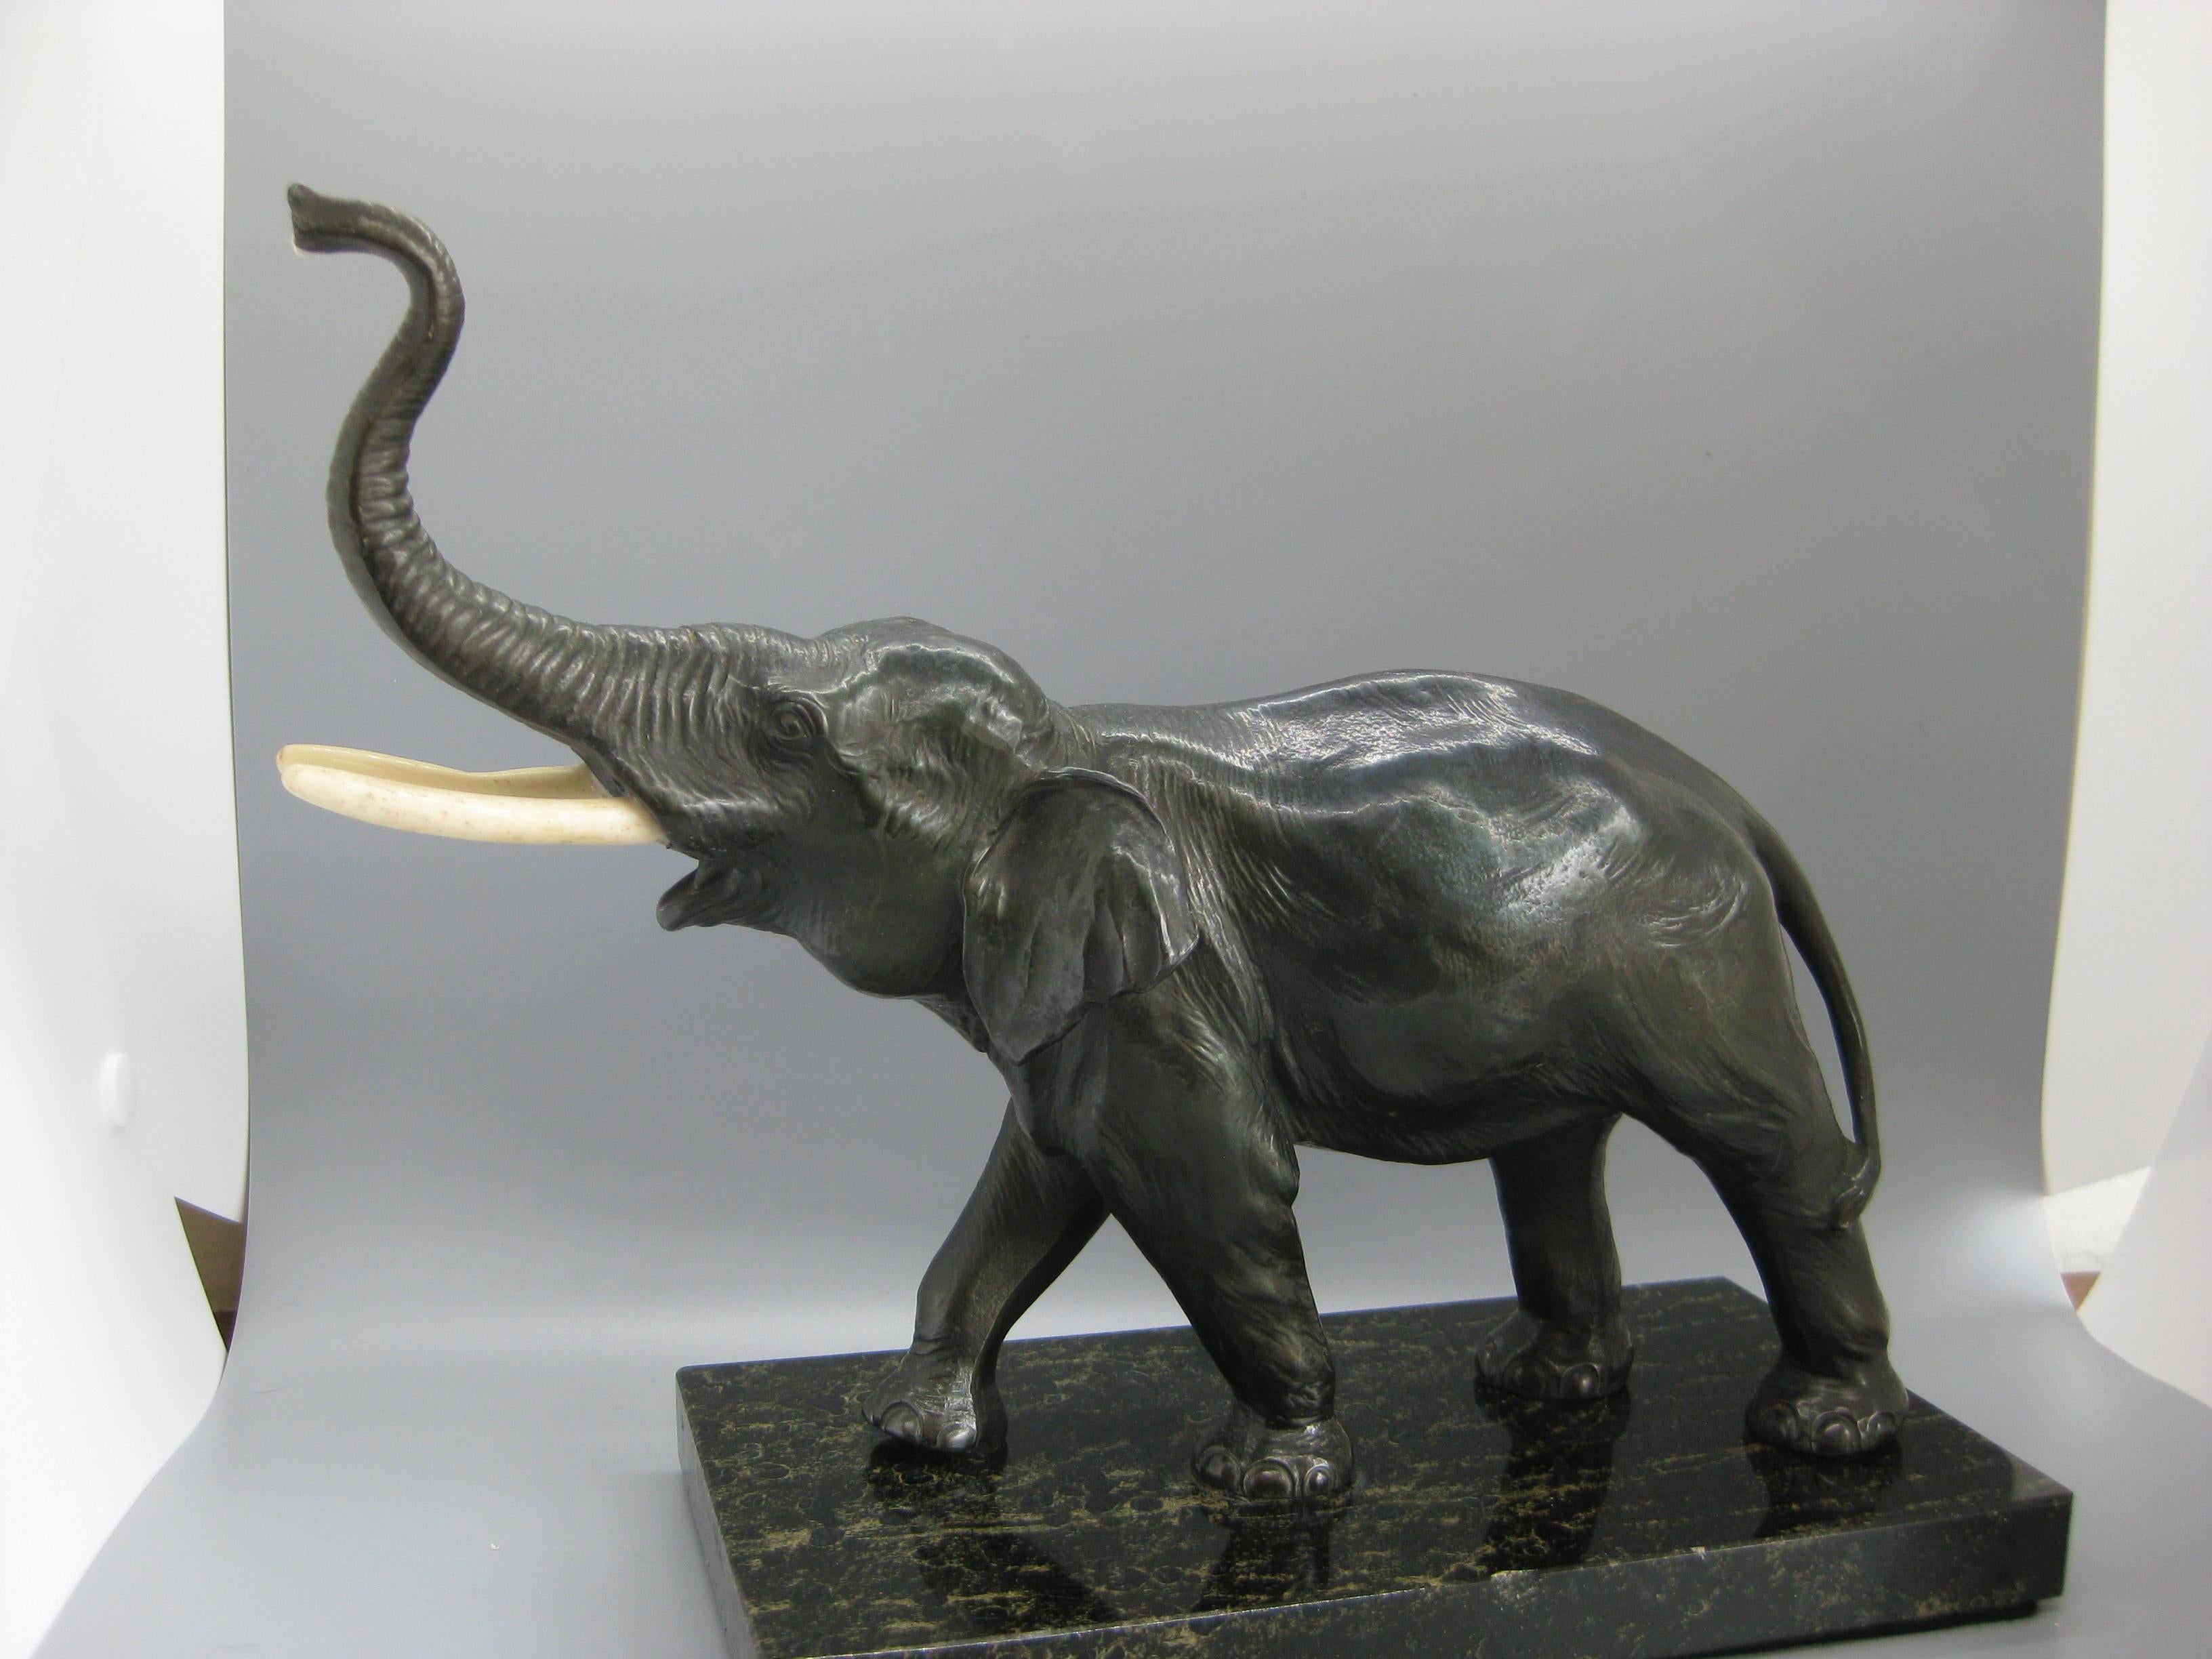 Great cast bronze elephant sculpture mounted on a marble base. Elephant has wonderful details and appears the tusks were replaced over time. Base has one tiny edge chip. Elephant has wonderful dark patina and in excellent shape.